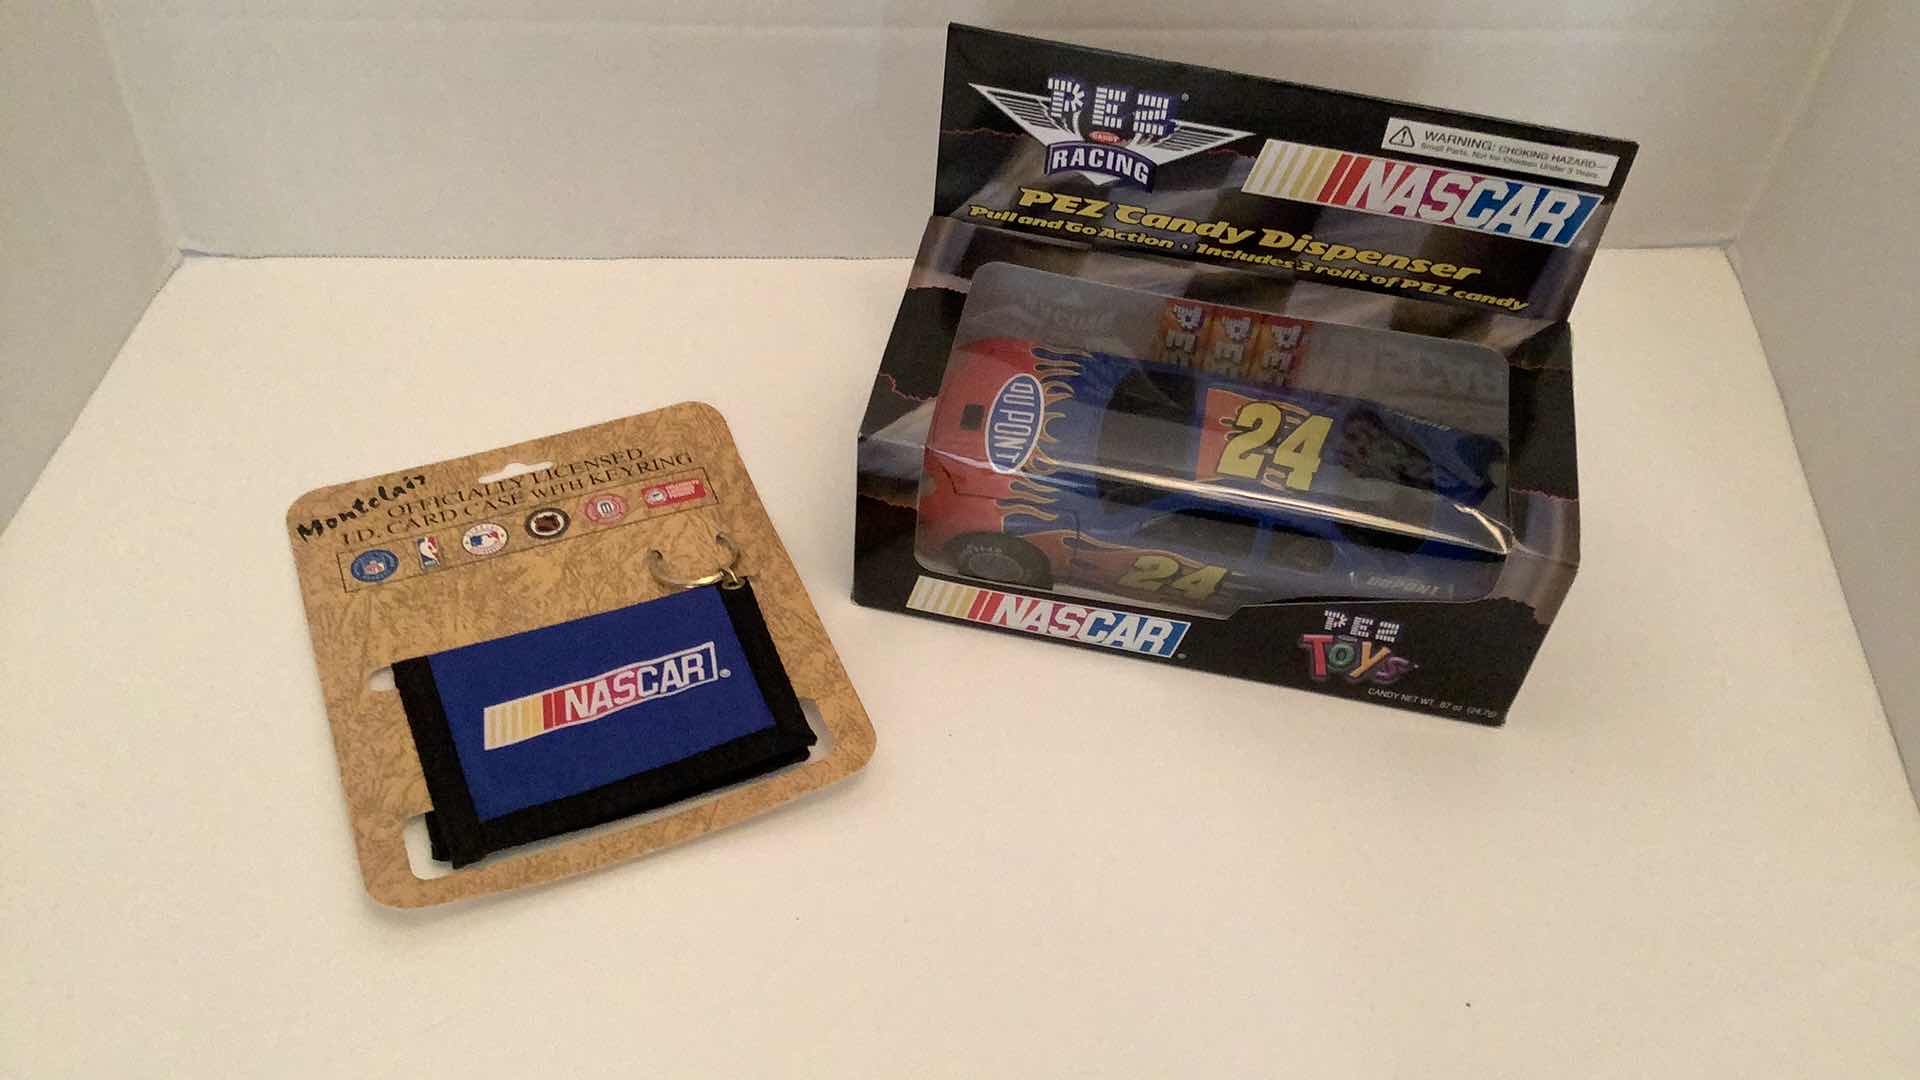 Photo 1 of NASCAR #24 PEZ CANDY DISPENSER AND CARD CASE